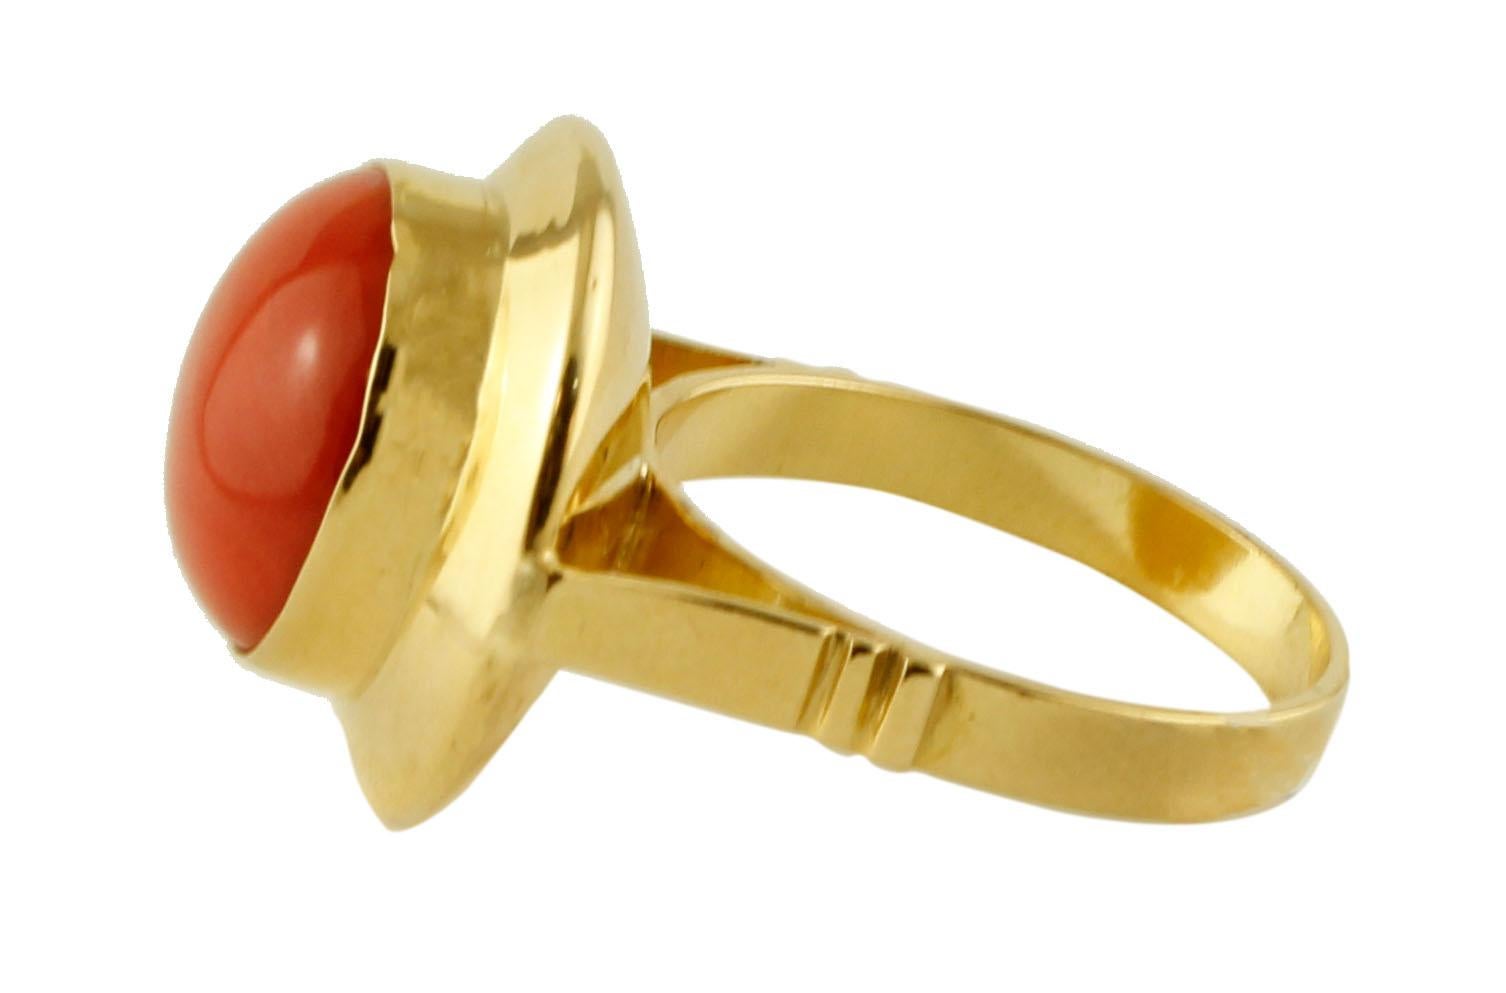 SHIPPING POLICY:
No additional costs will be added to this order.
Shipping costs will be totally covered by the seller (customs duties included). 


Vintage ring in 18k yellow gold structure mounted with a central rubrum coral sphere.
The origin of